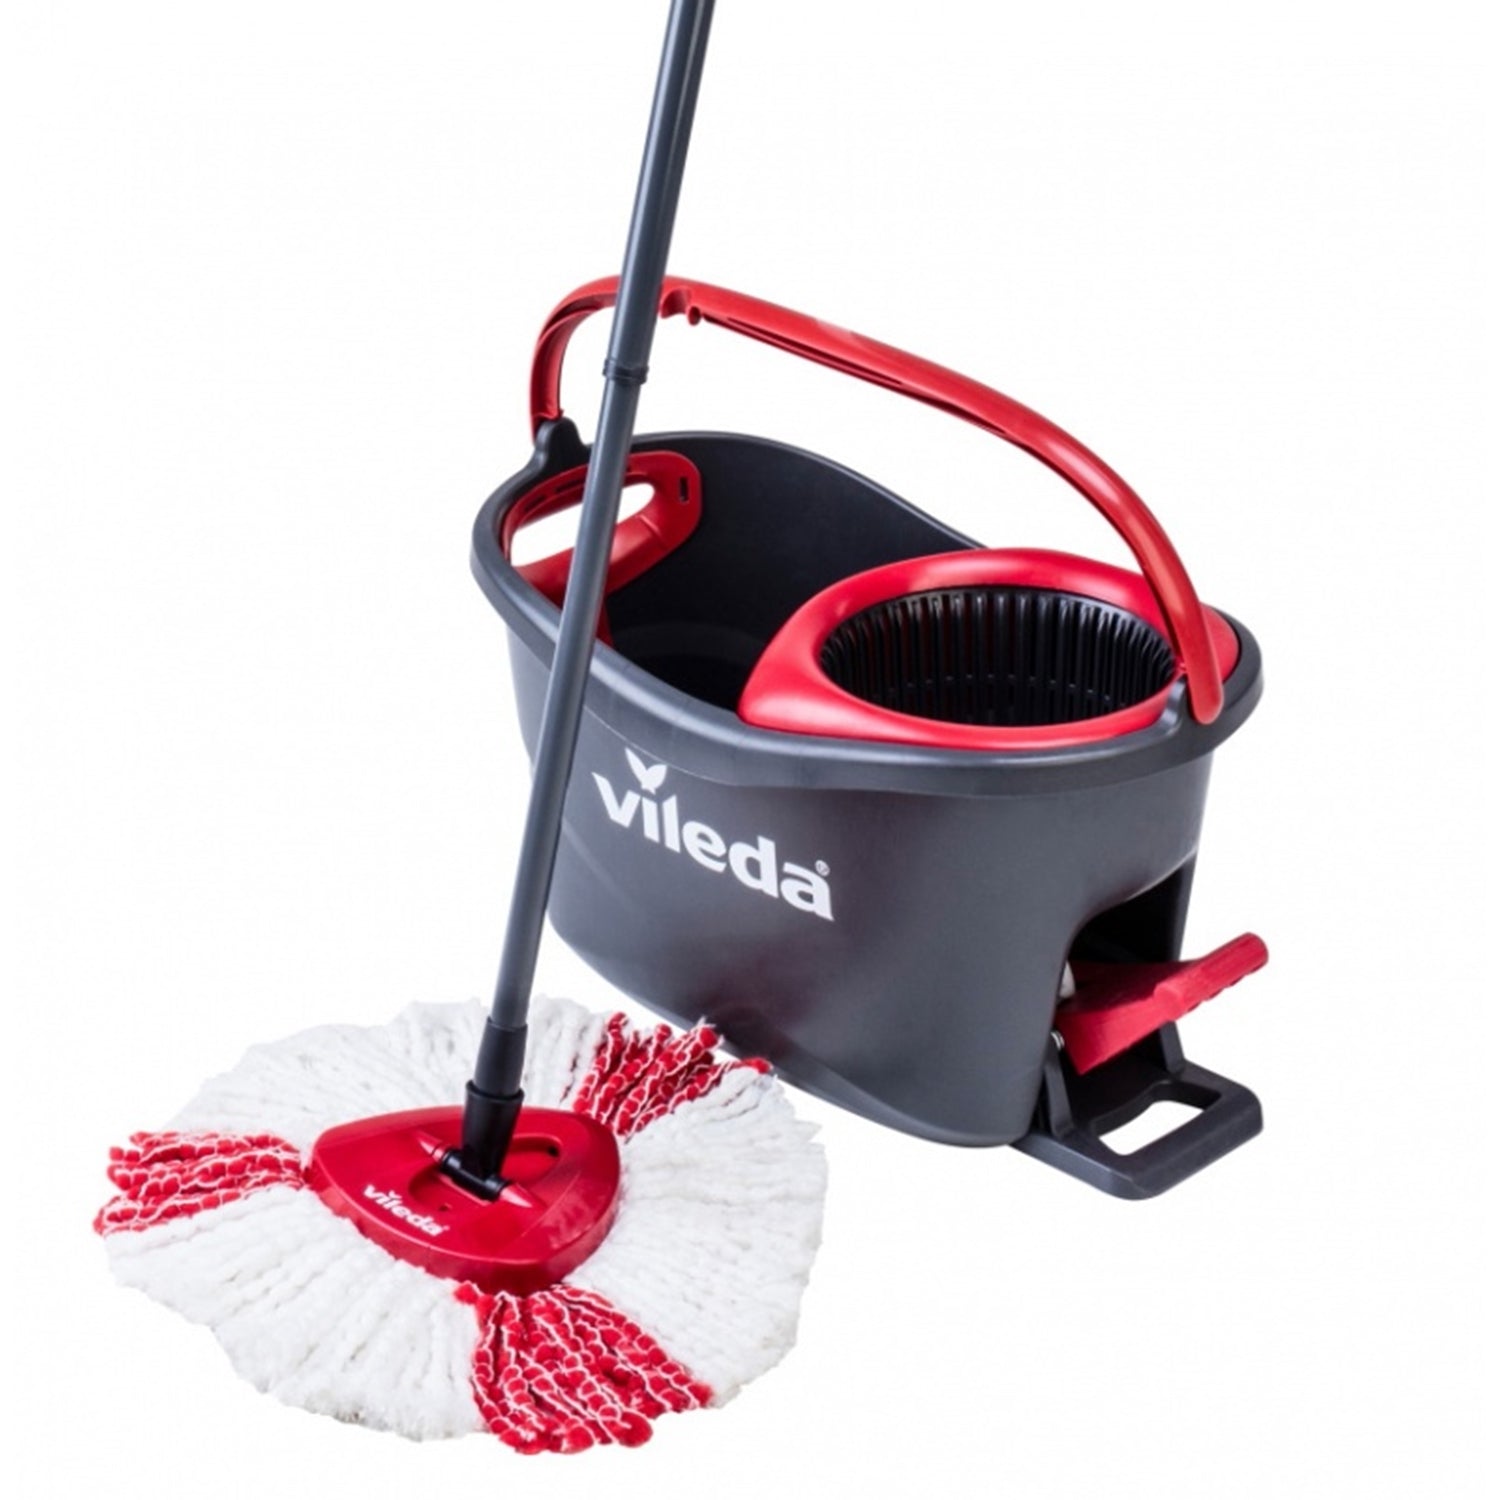 Vileda Spin and Clean System Complete Mop and Bucket Set